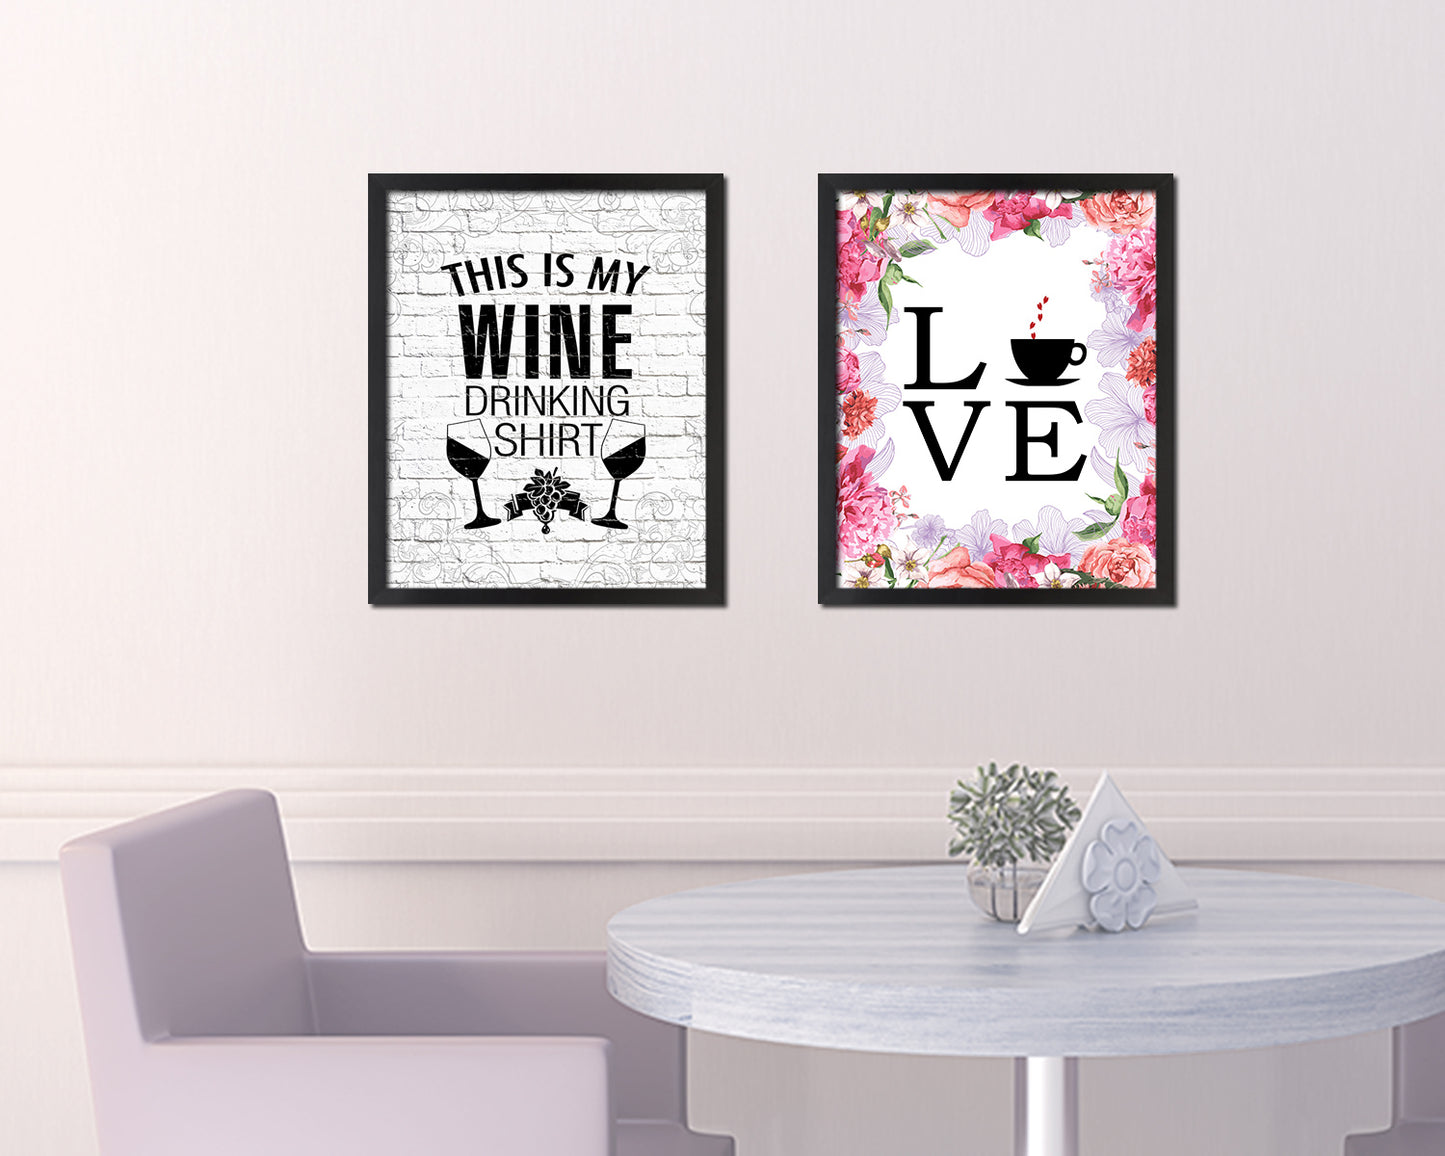 This is my wine drinking shirt Words Wood Framed Print Wall Decor Art Gifts